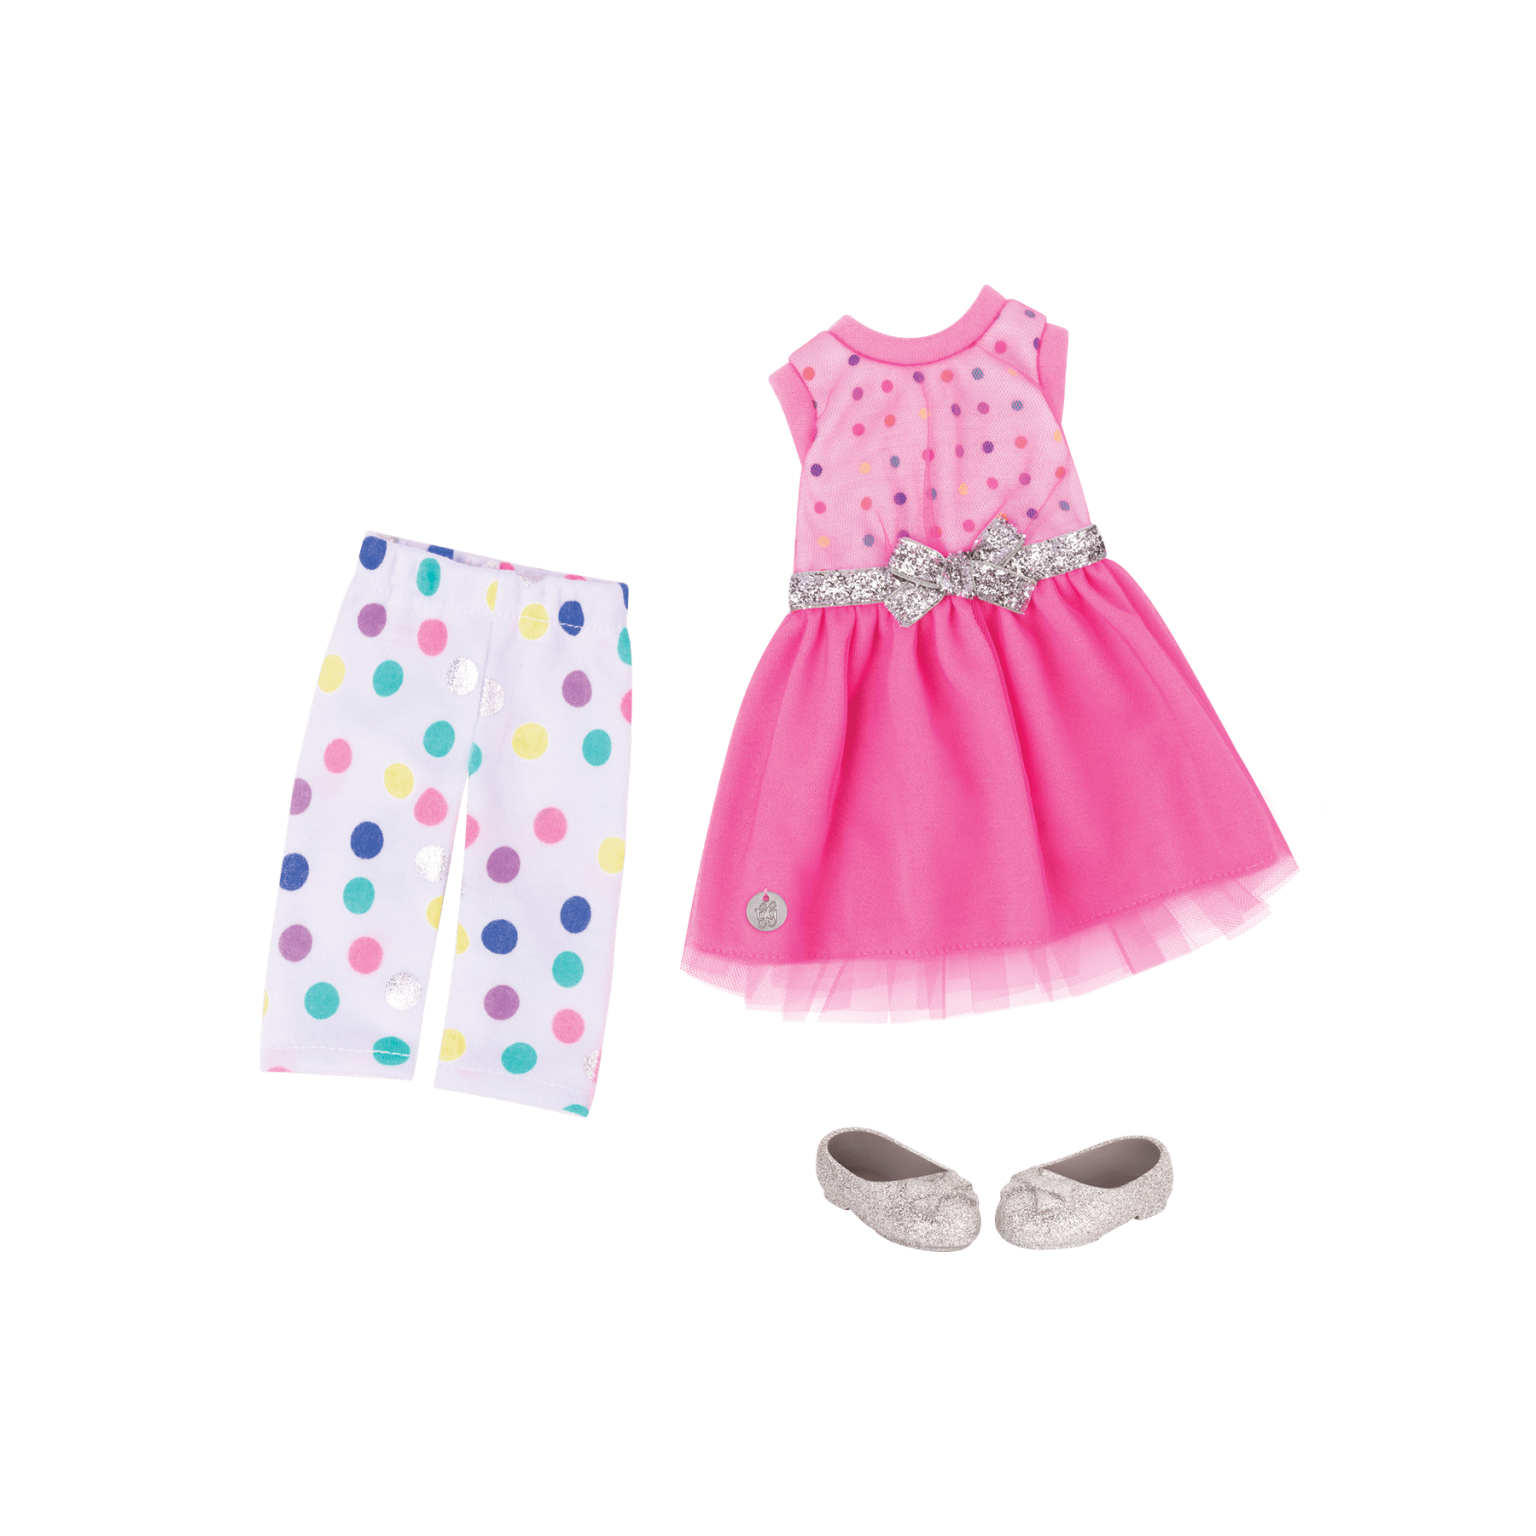 14-inch Fashion Dolls, Outfits & Accessories | Glitter Girls